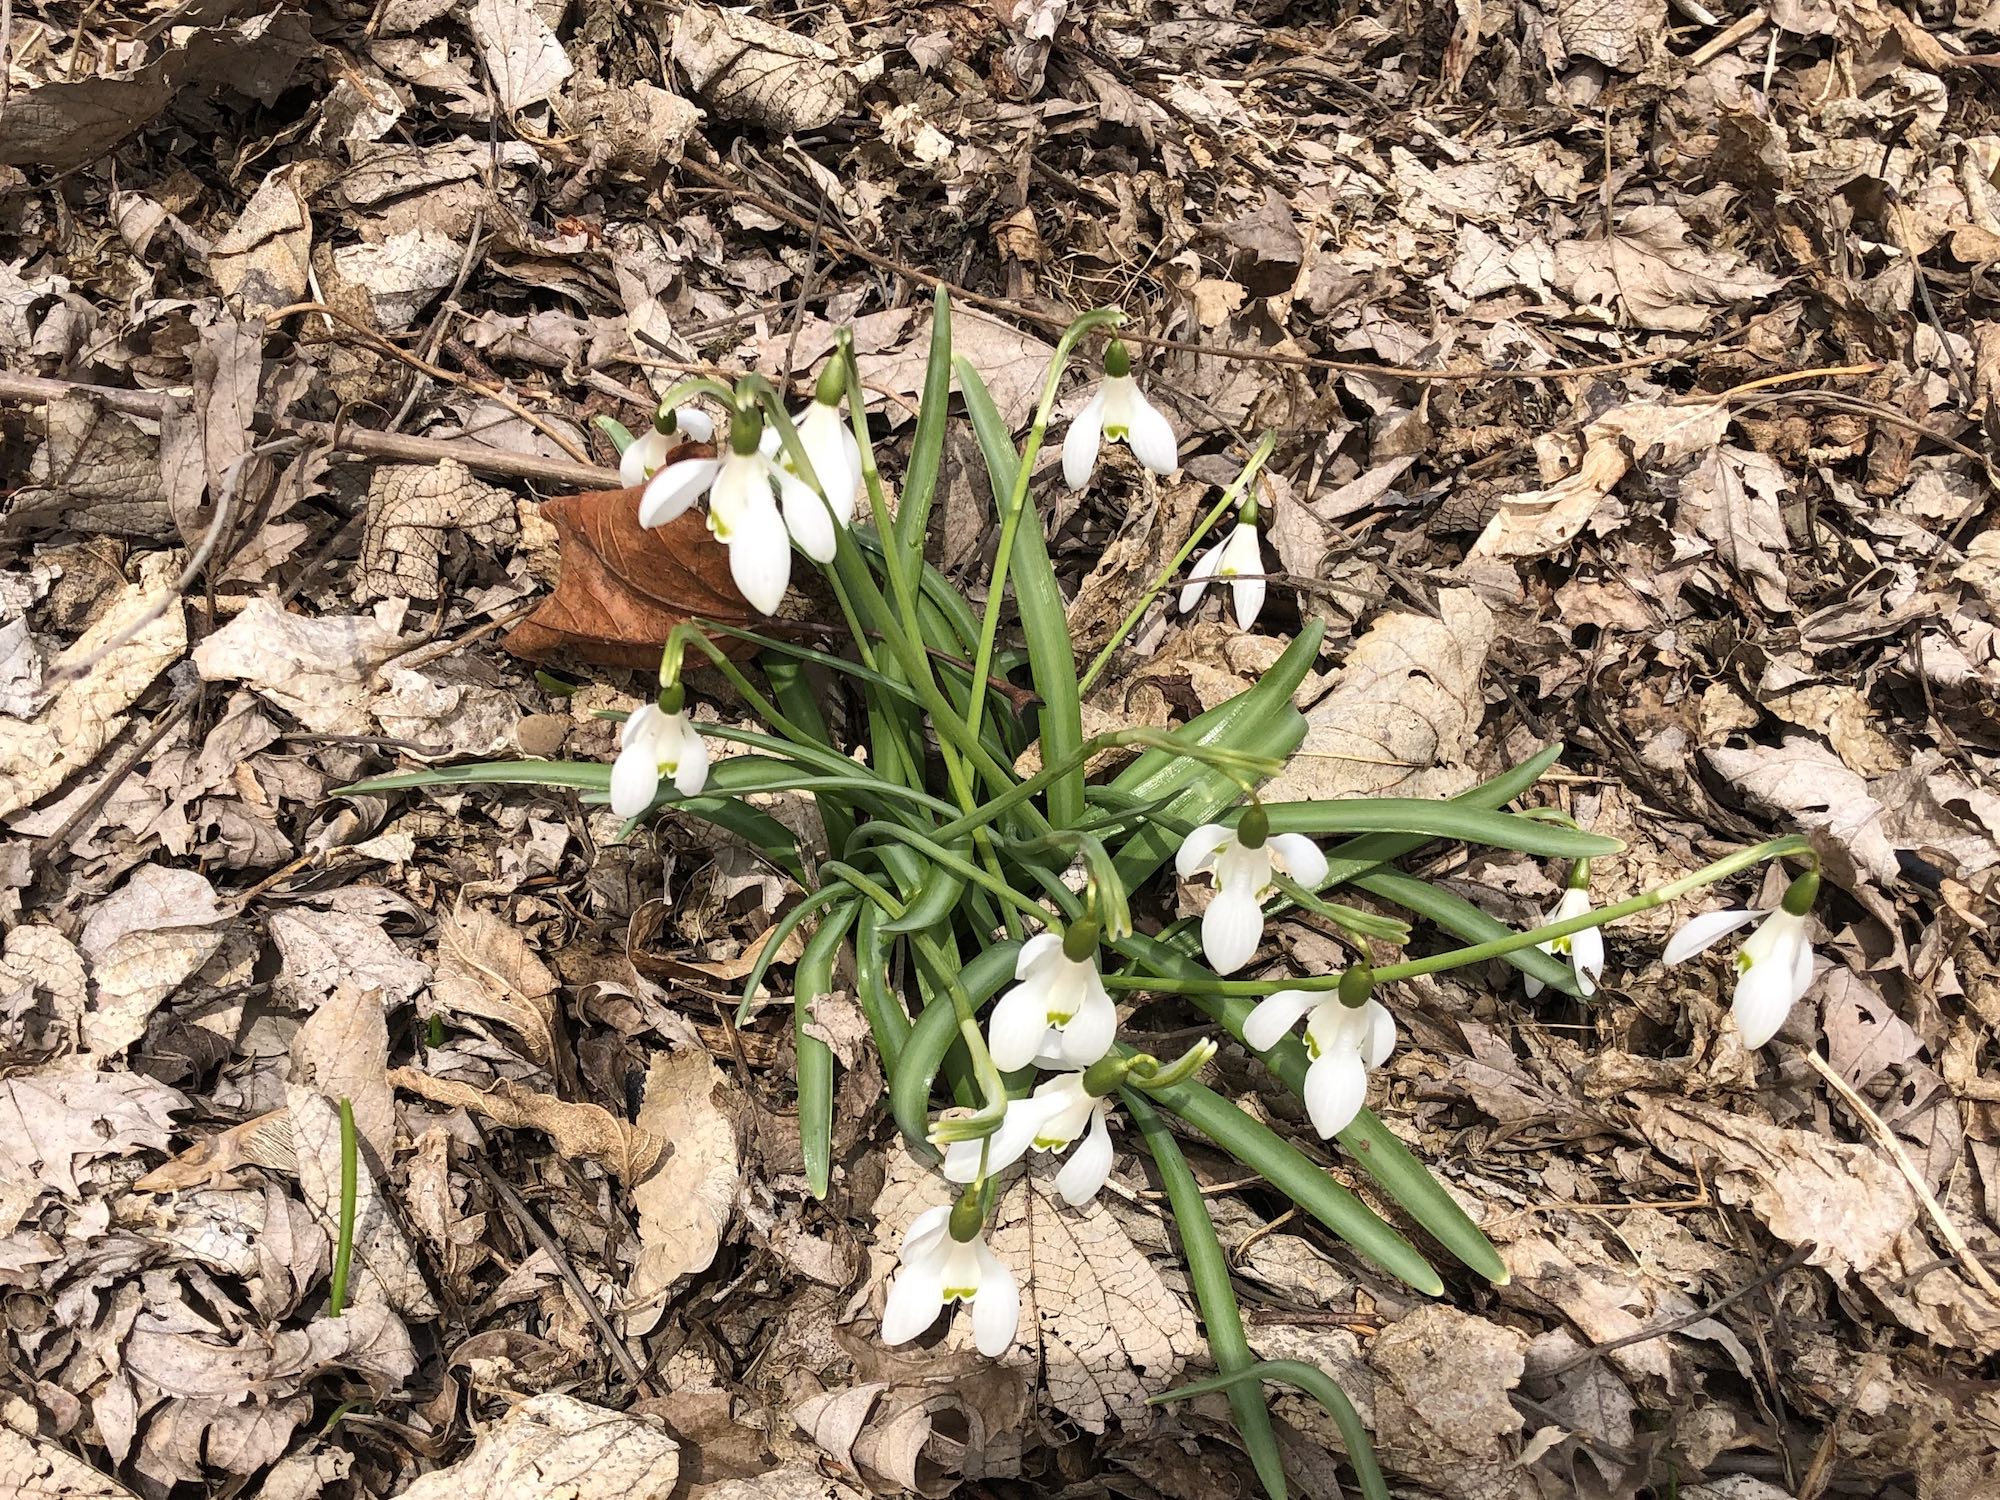 Snowdrops in woods between the Sycamore Tree on Arbor Drive and the bike path entrance to the Oak Savanna on May 20, 2019.